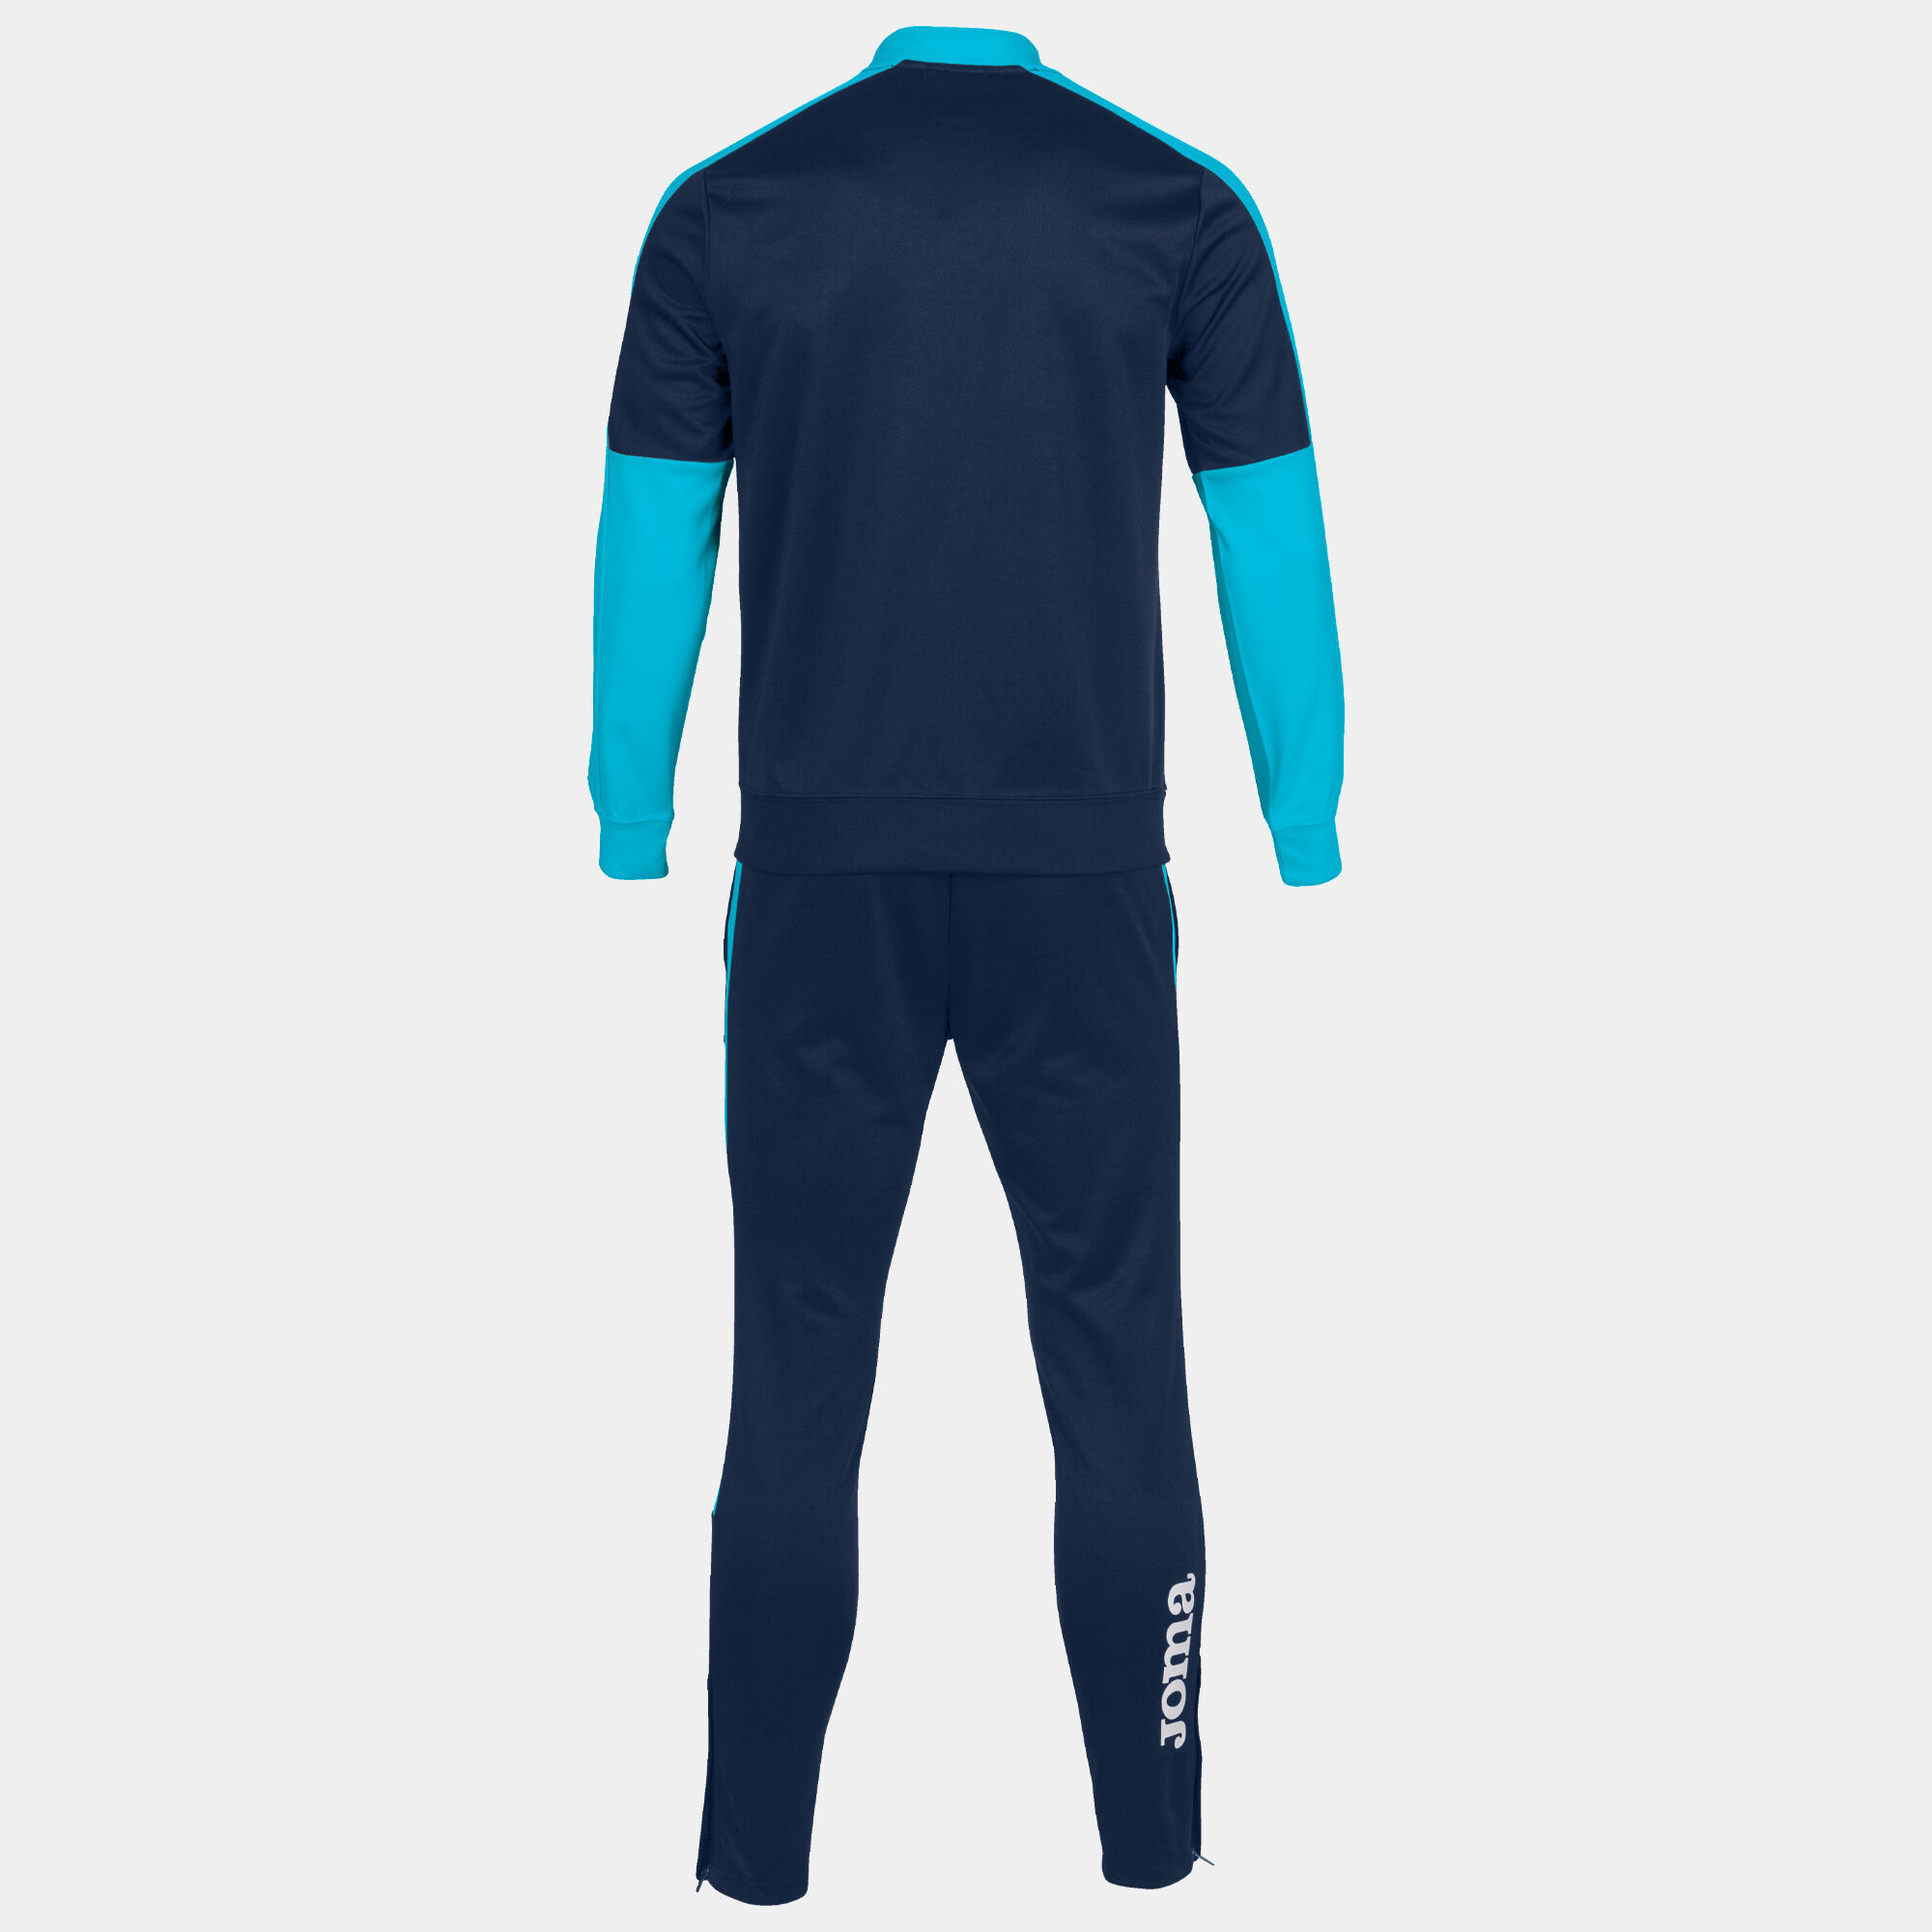 TRACKSUIT MAN ECO CHAMPIONSHIP NAVY BLUE FLUORESCENT TURQUOISE